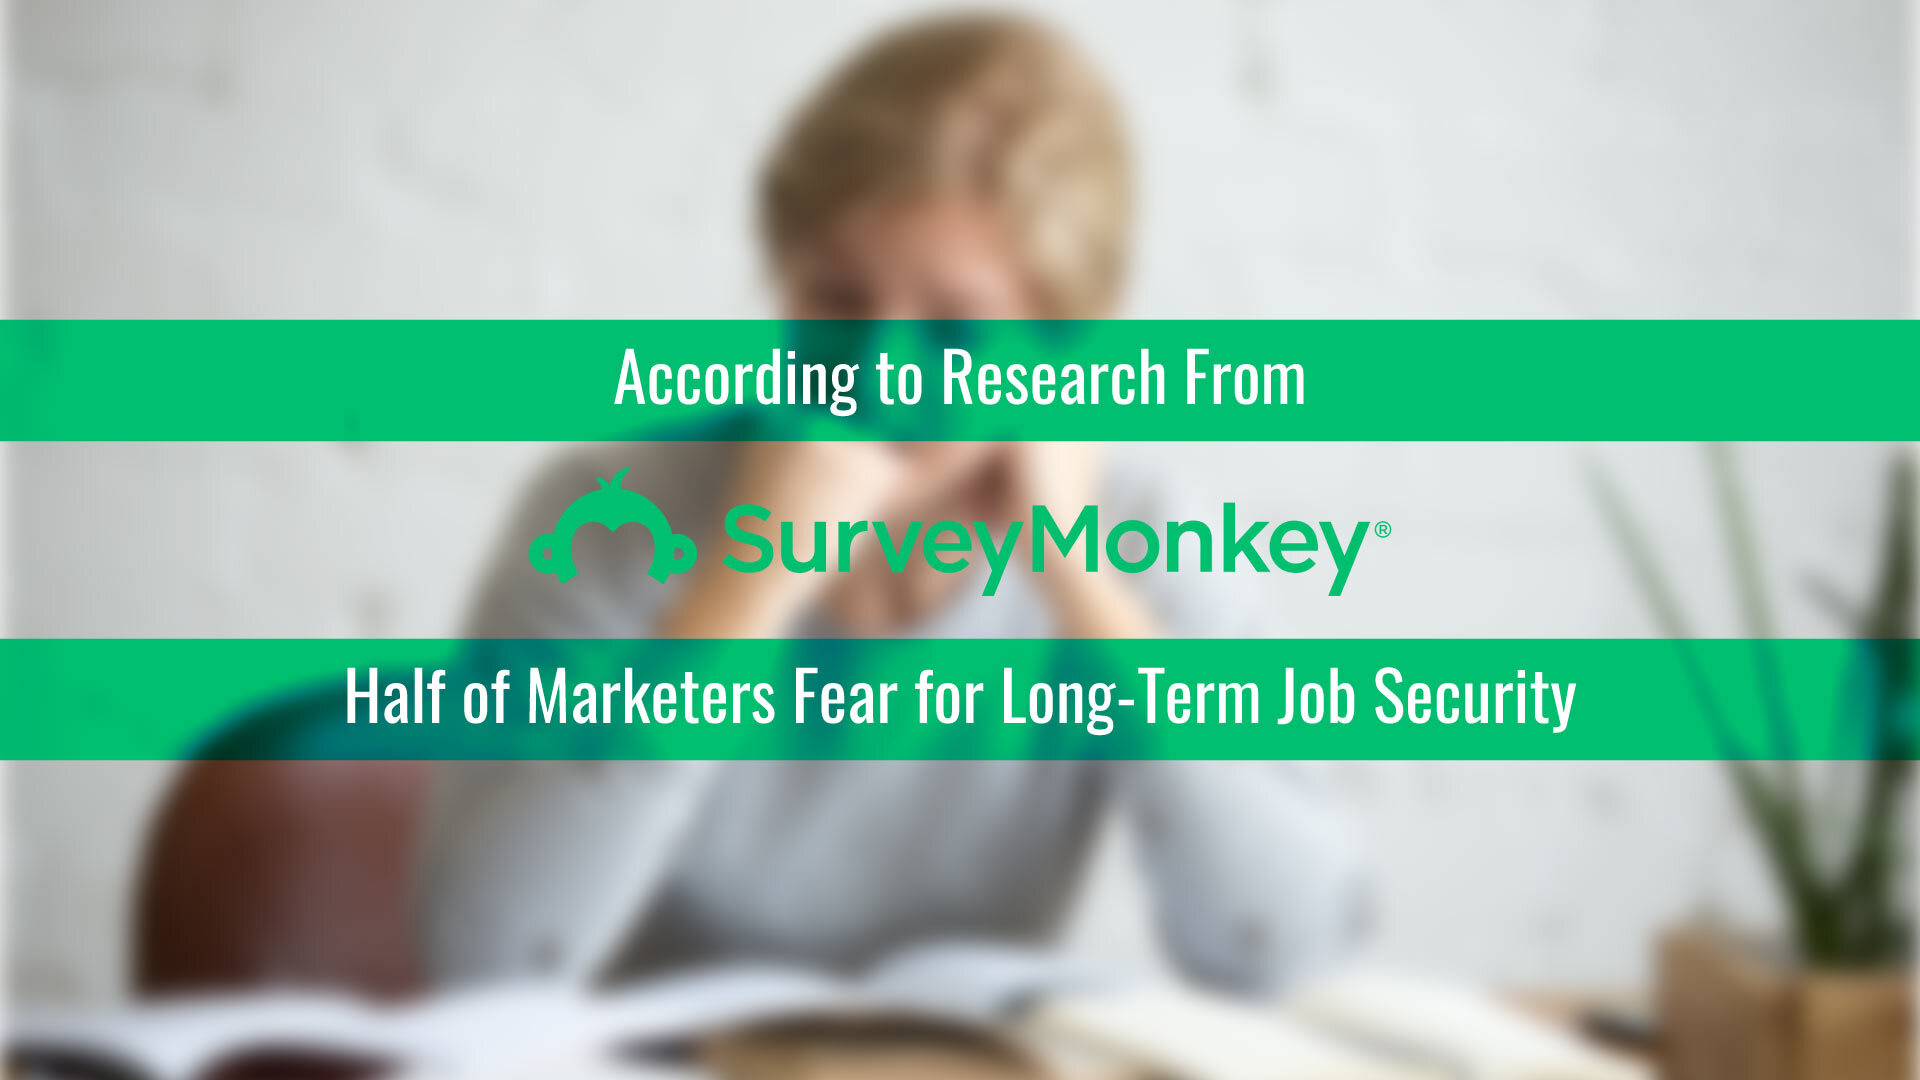 Almost Half of Marketers Fear for Long-Term Job Security